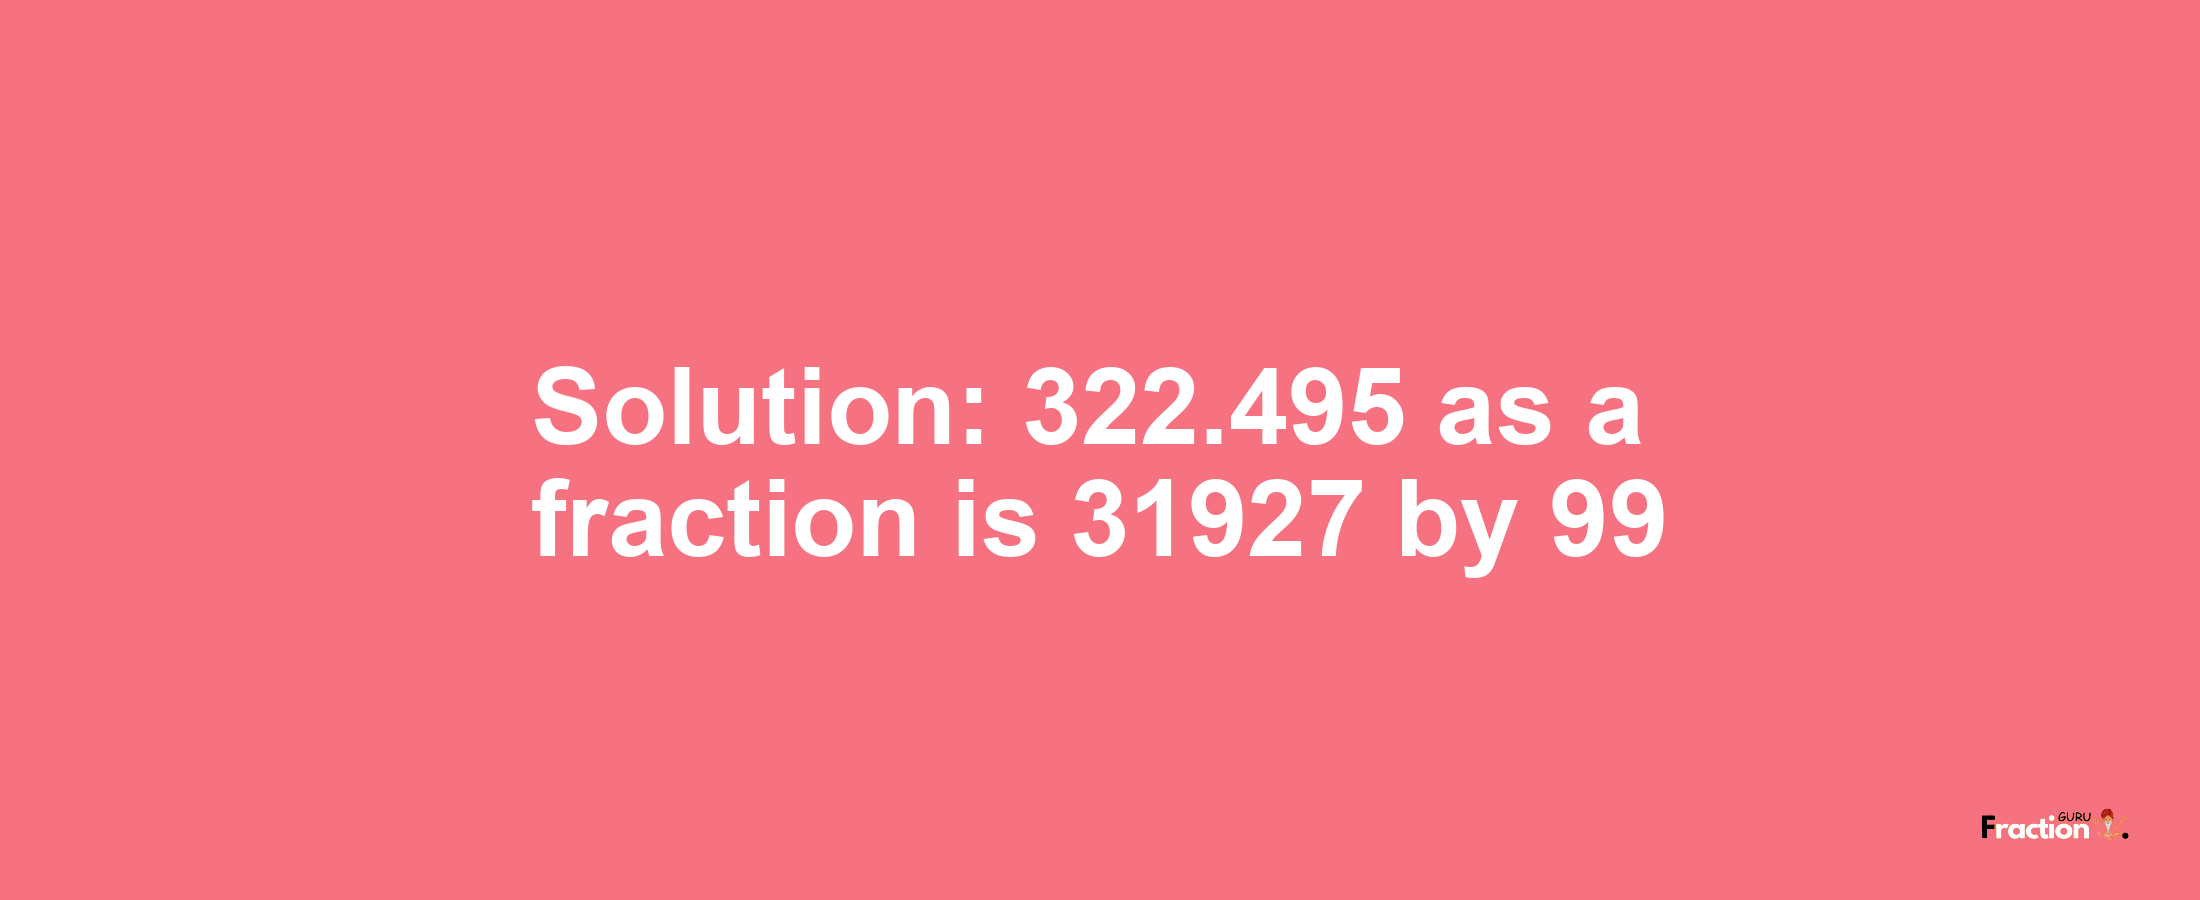 Solution:322.495 as a fraction is 31927/99